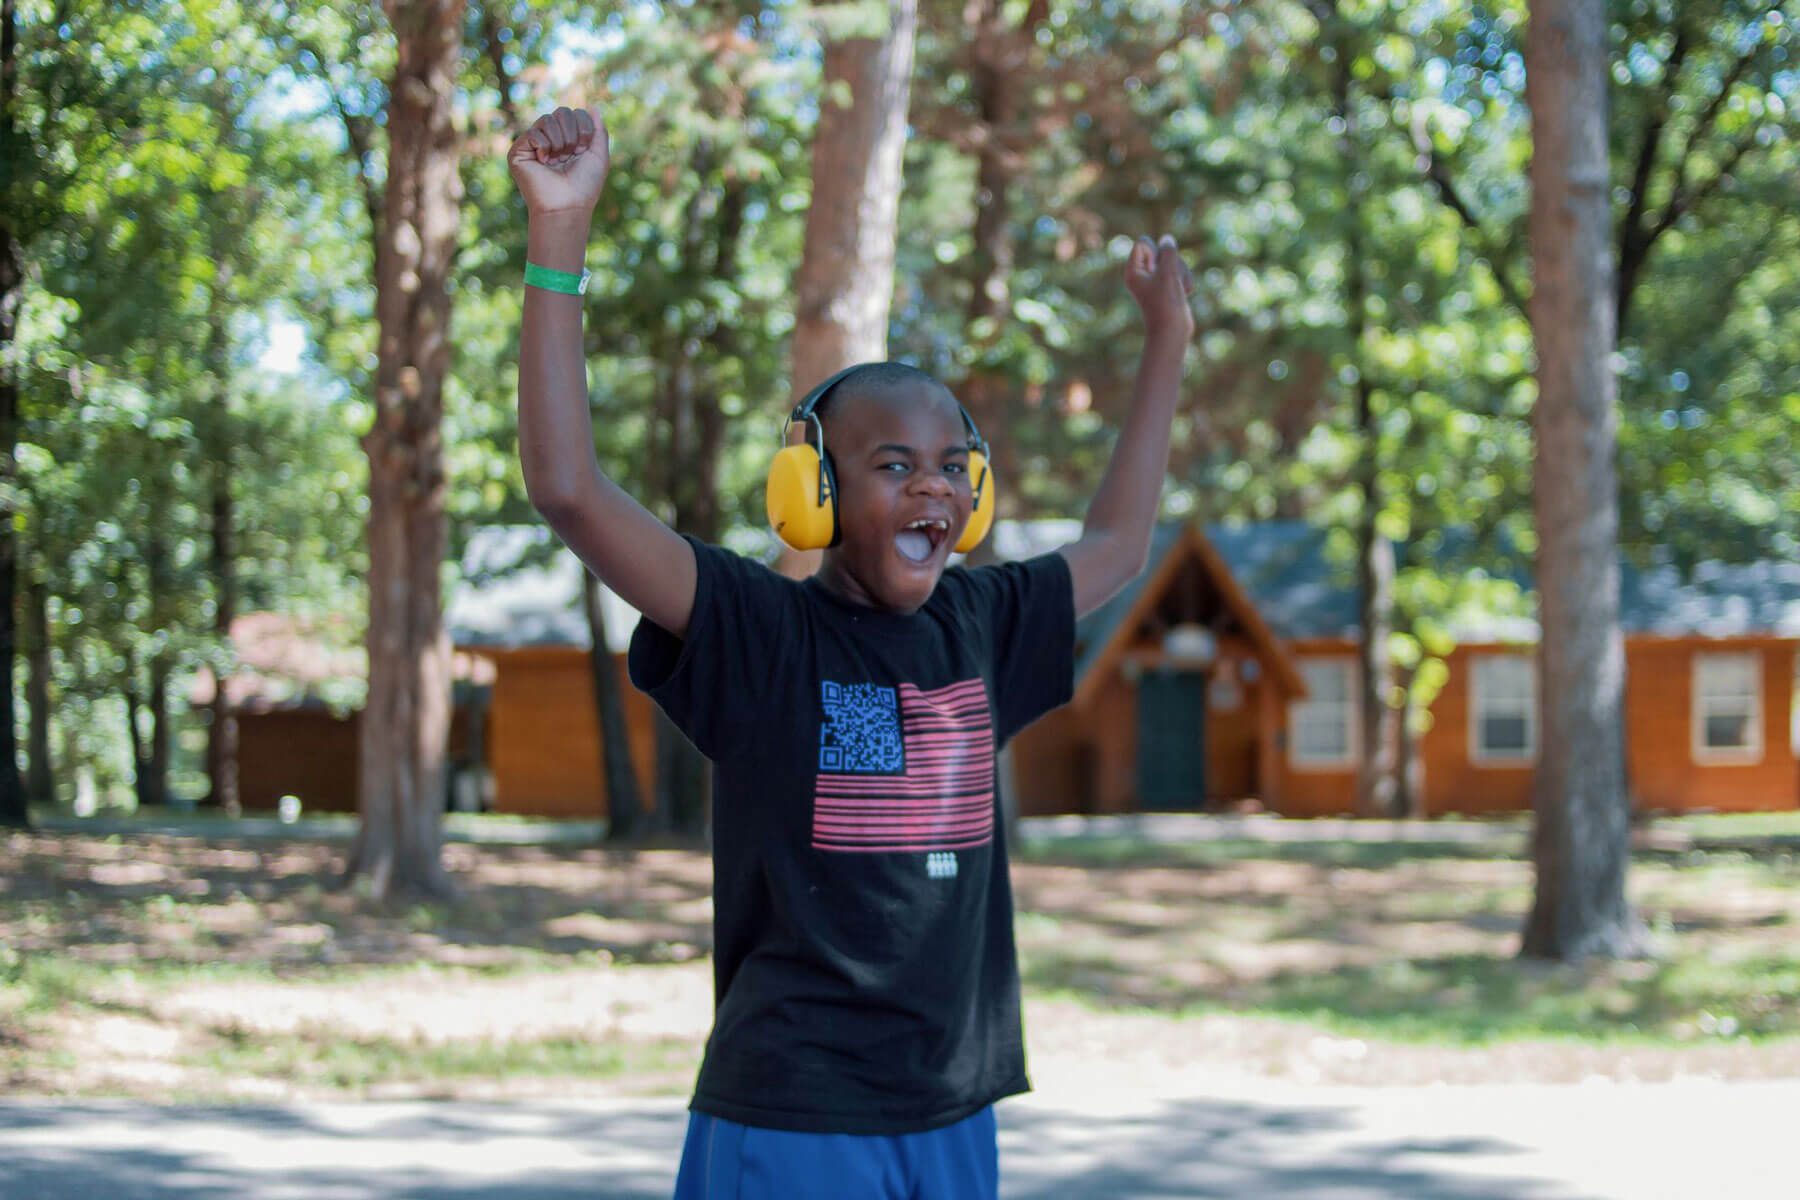 Camper walking with headphones and raised arms smiling and cheering